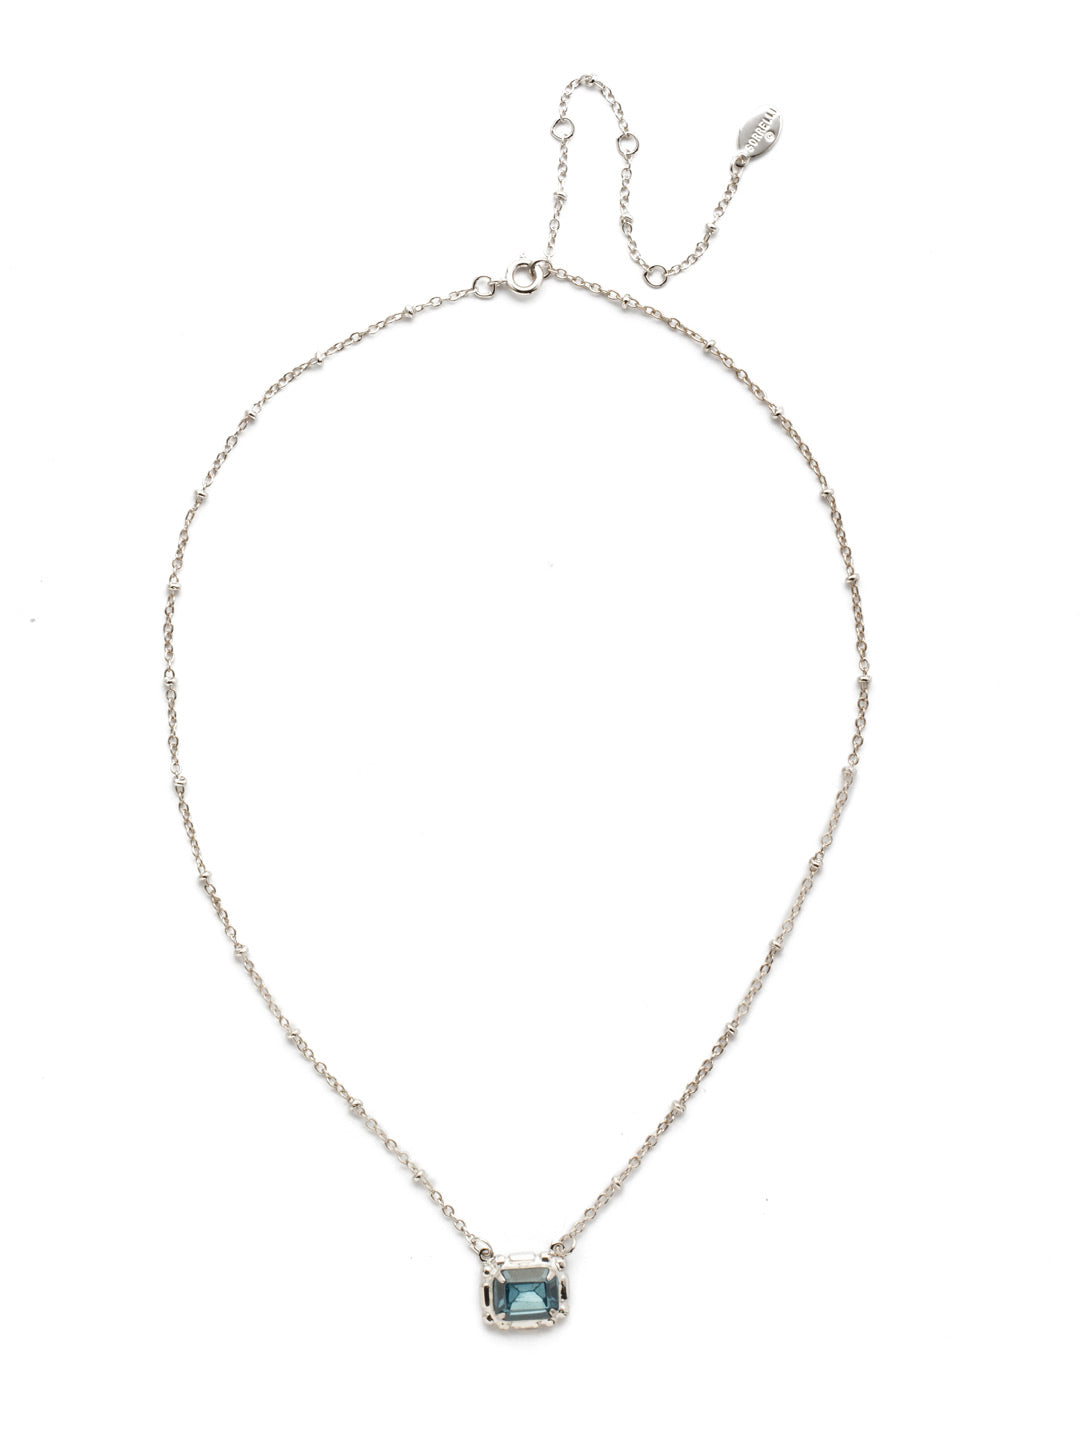 Meera Pendant Necklace - NEF47RHDI - <p>This dainty gemstone is surrounded by a slender chain necklace that is sure you make any outfit look sophisticated and chic. From Sorrelli's Dark Indigo collection in our Palladium Silver-tone finish.</p>